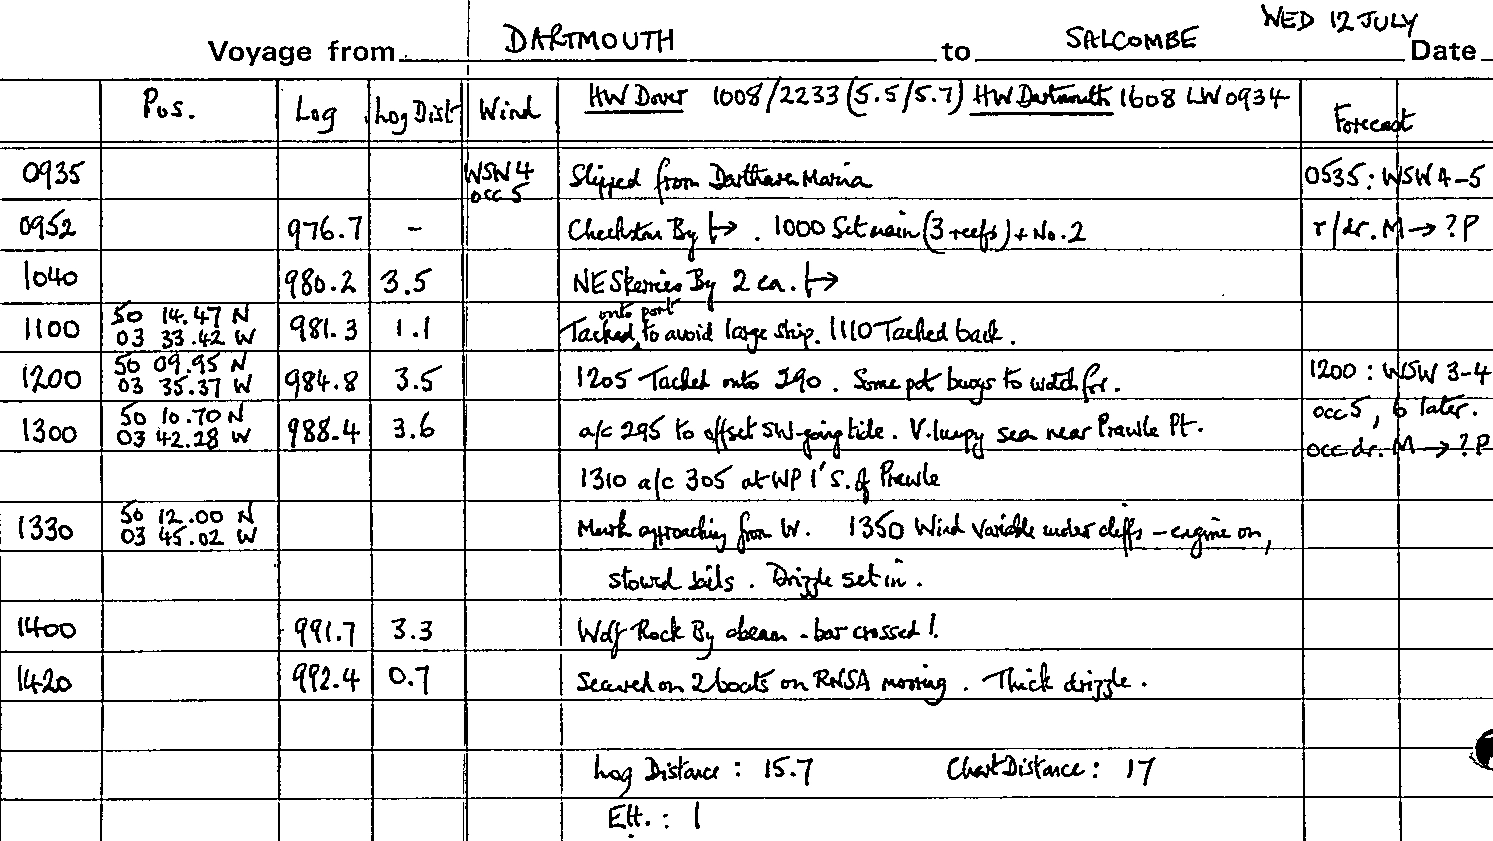 Log entries for voyage from Dartmouth to Salcombe on Wed 12 July